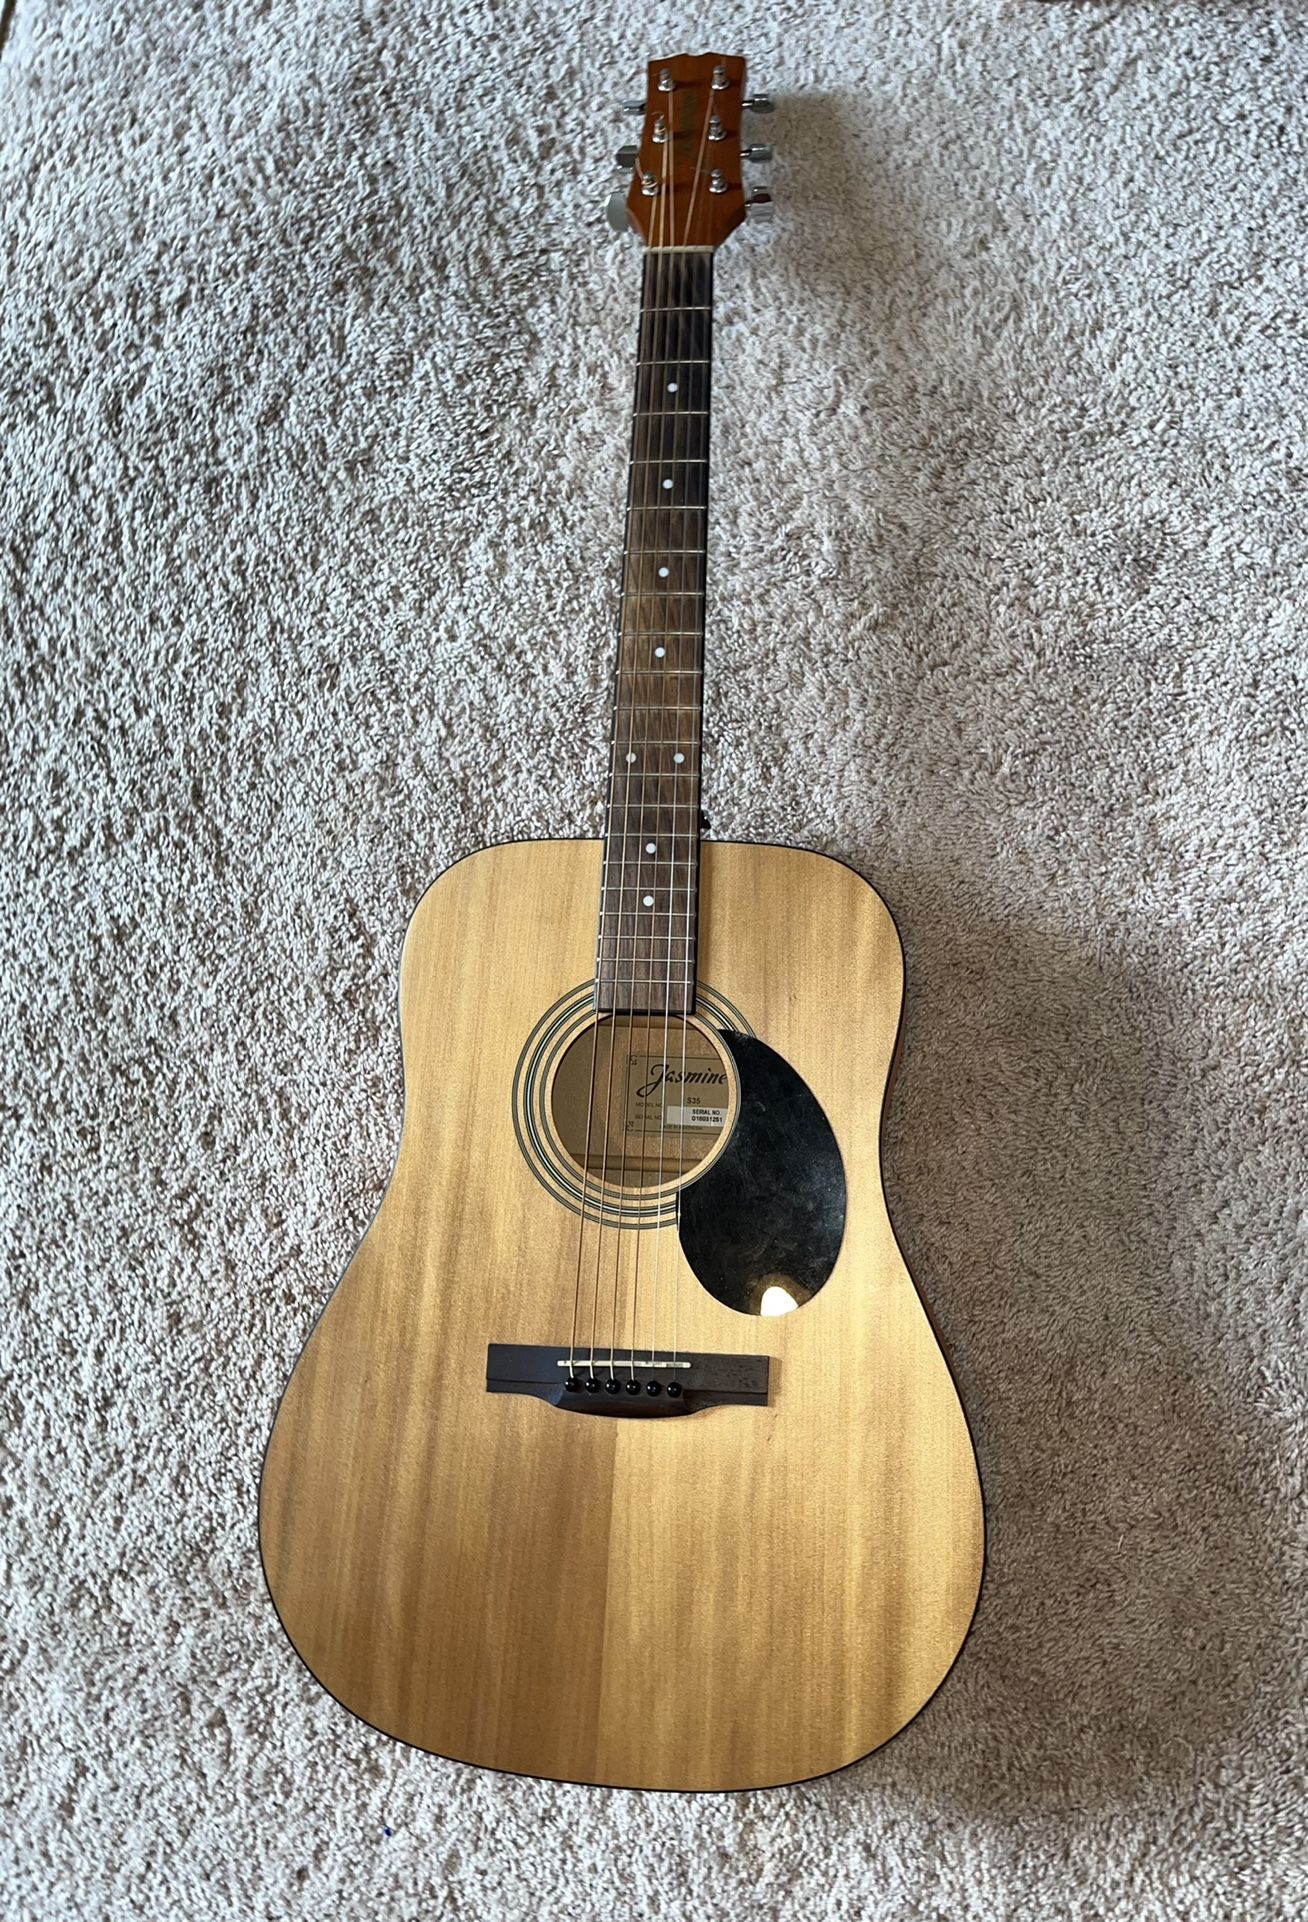 Jasmine S-35 and Fender Dreadnought Guitar Case